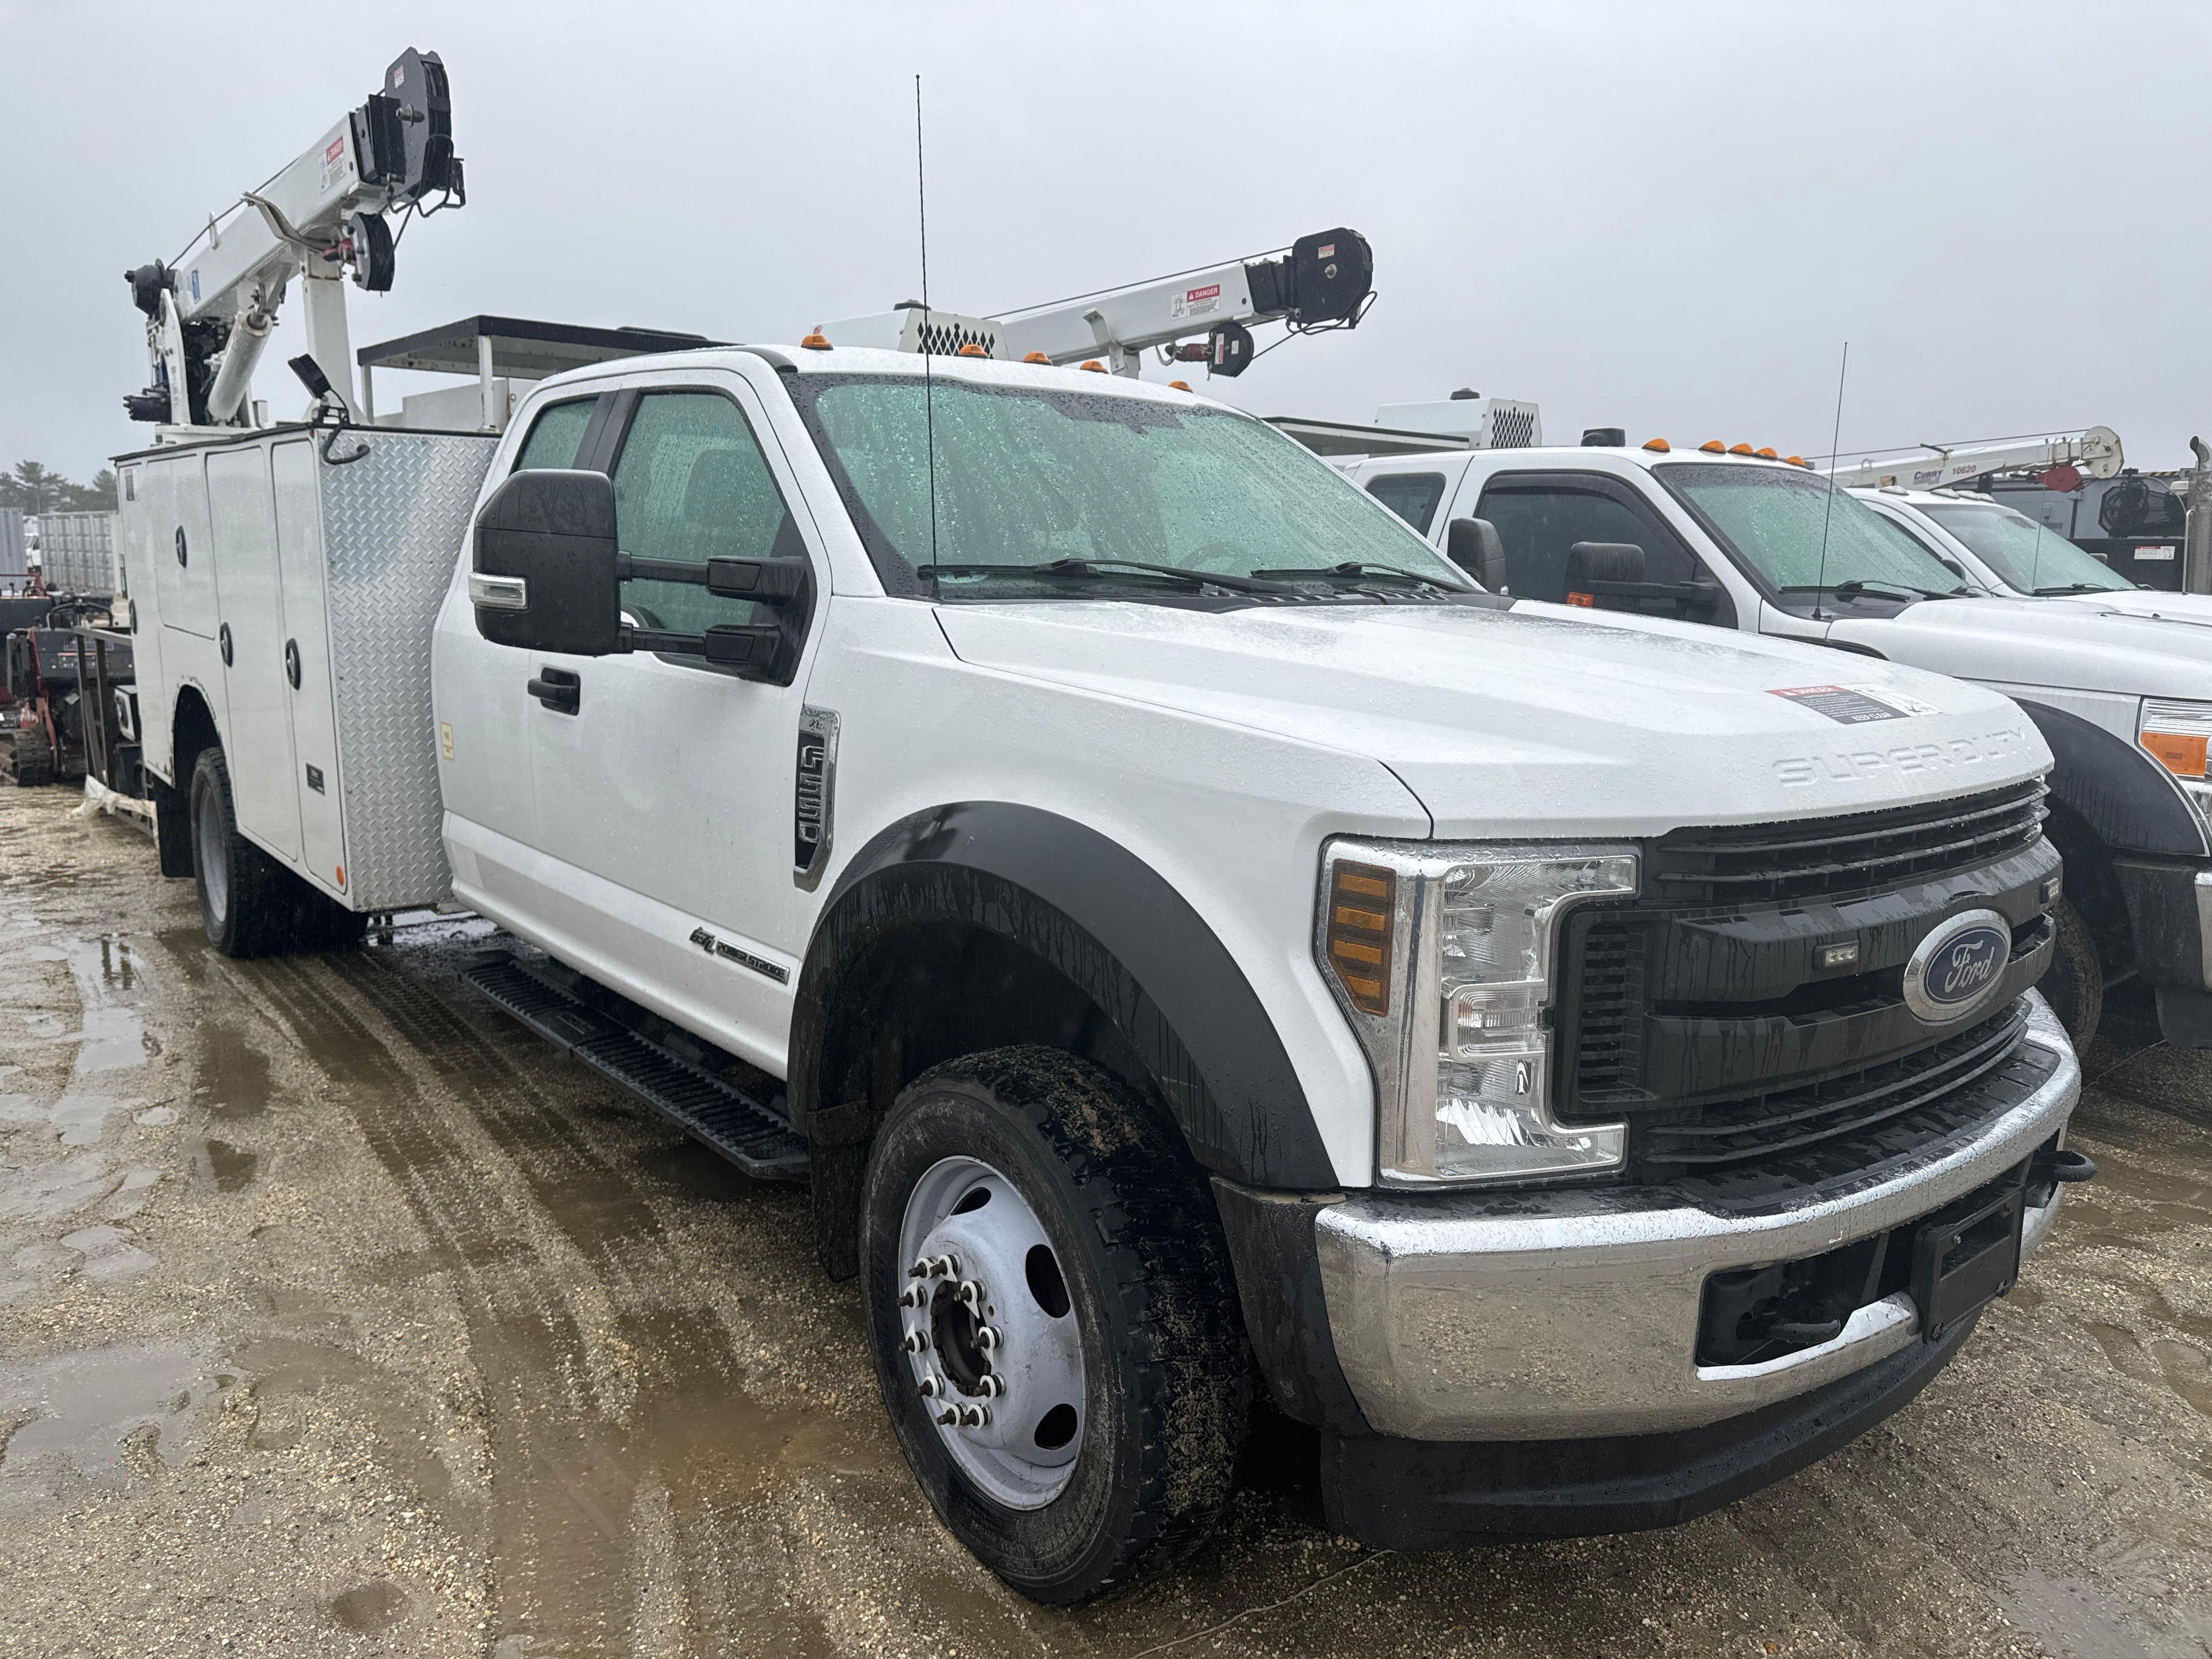 2018 FORD F550 SERVICE TRUCK VN:D03032 powered by Power stroke 6.7L V8 turbo diesel engine, equipped